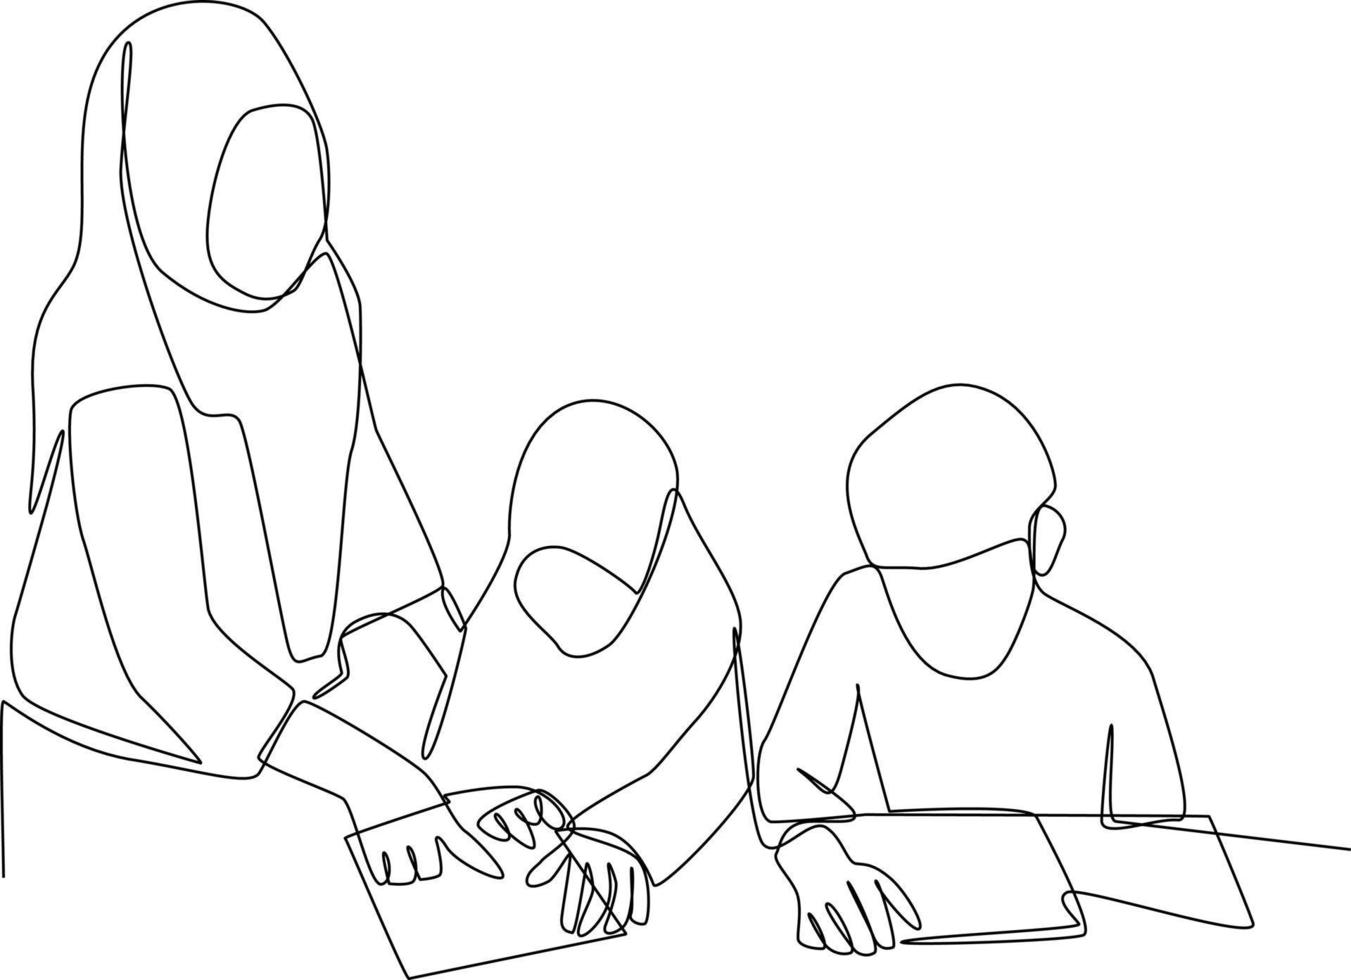 Single one-line drawing the teacher corrects the student's mistakes. Class in session concept. Continuous line drawing design graphic vector illustration.